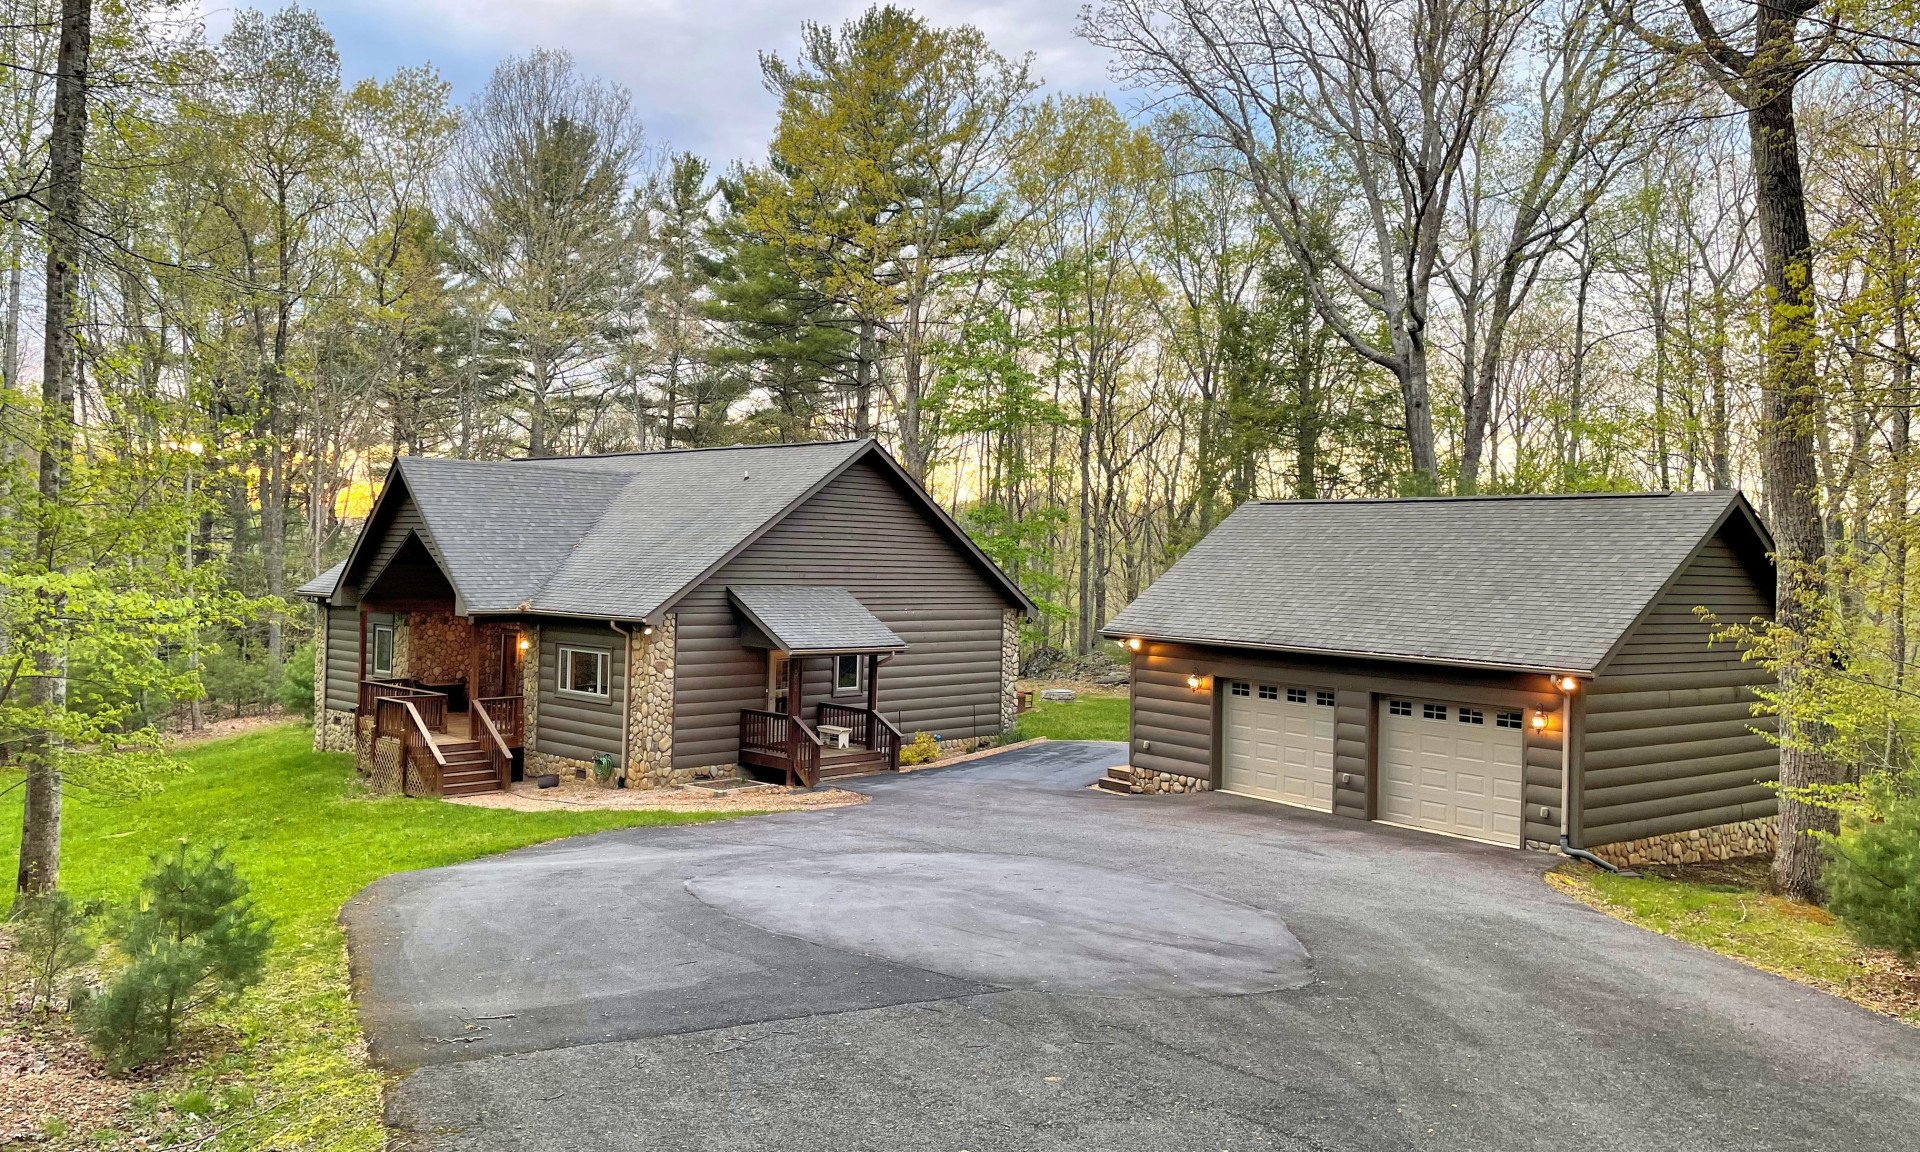 You'll have the privacy you've dreamed of on a wooded lot almost 4 acres in size while enjoying the benefits of a neighborhood with gentle rolling paved roads and well-spaced out homes.